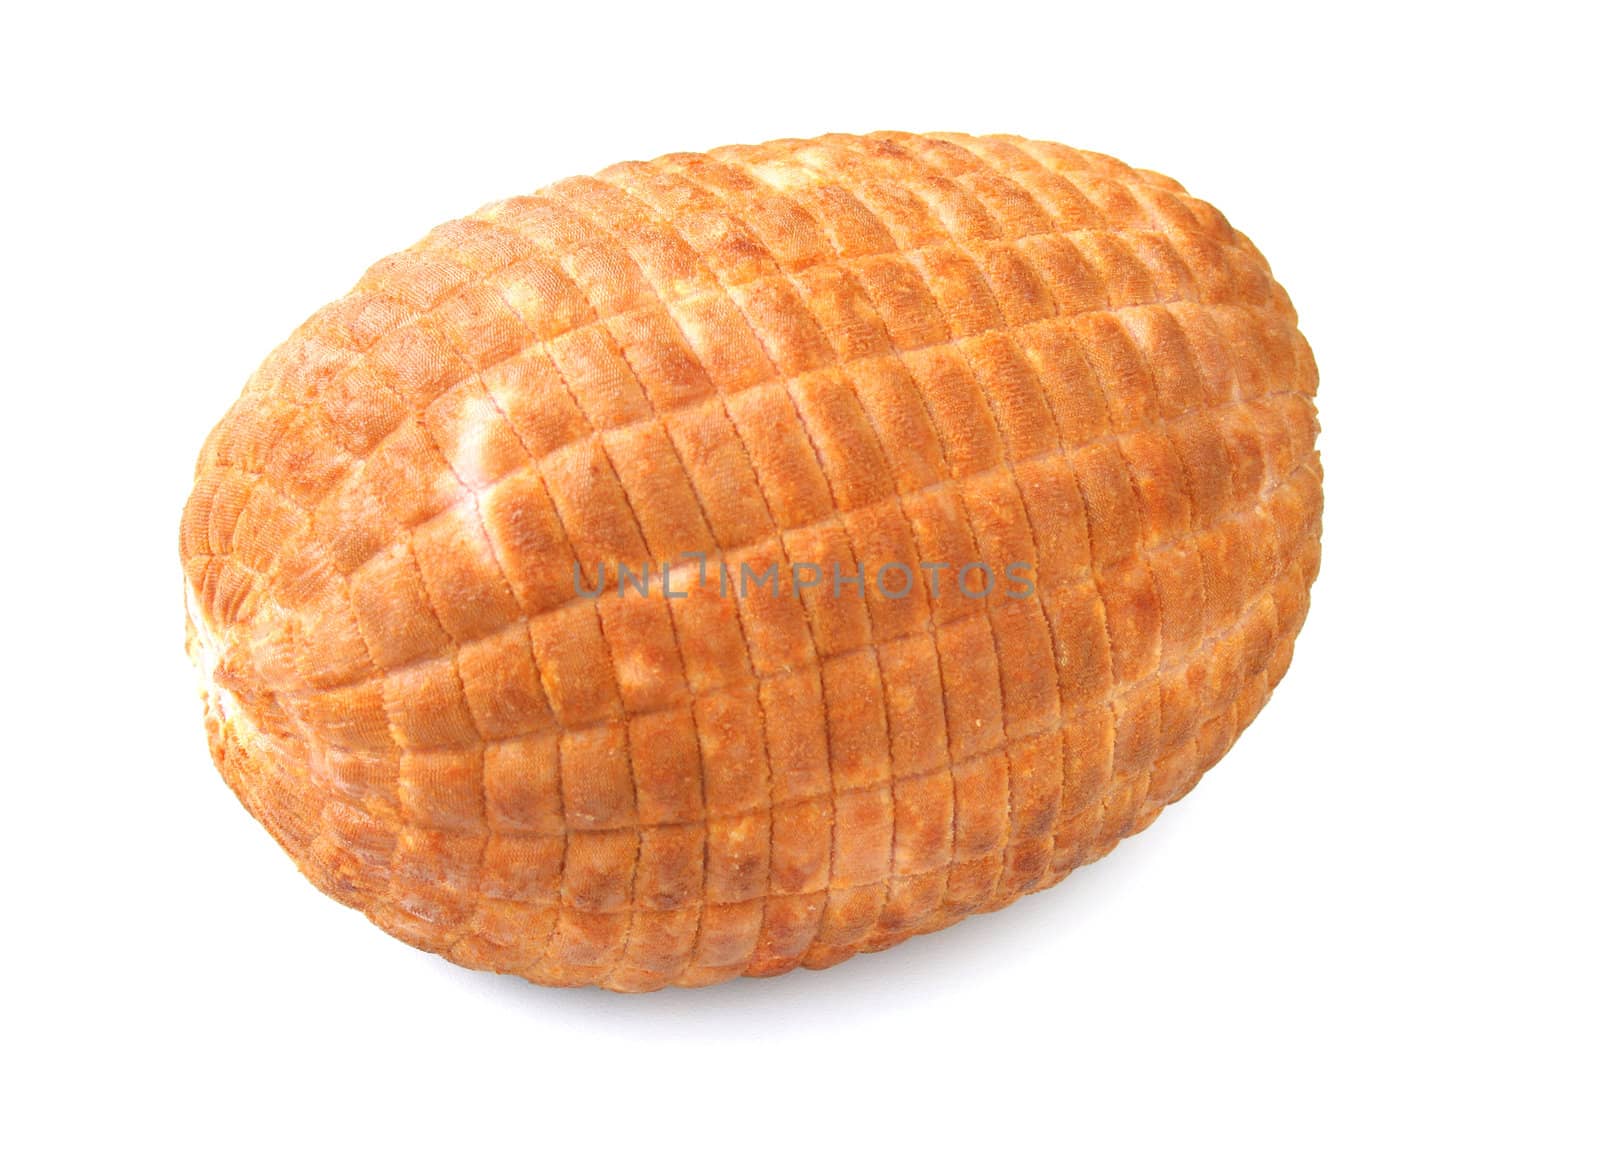 A whole ham isolated on white.